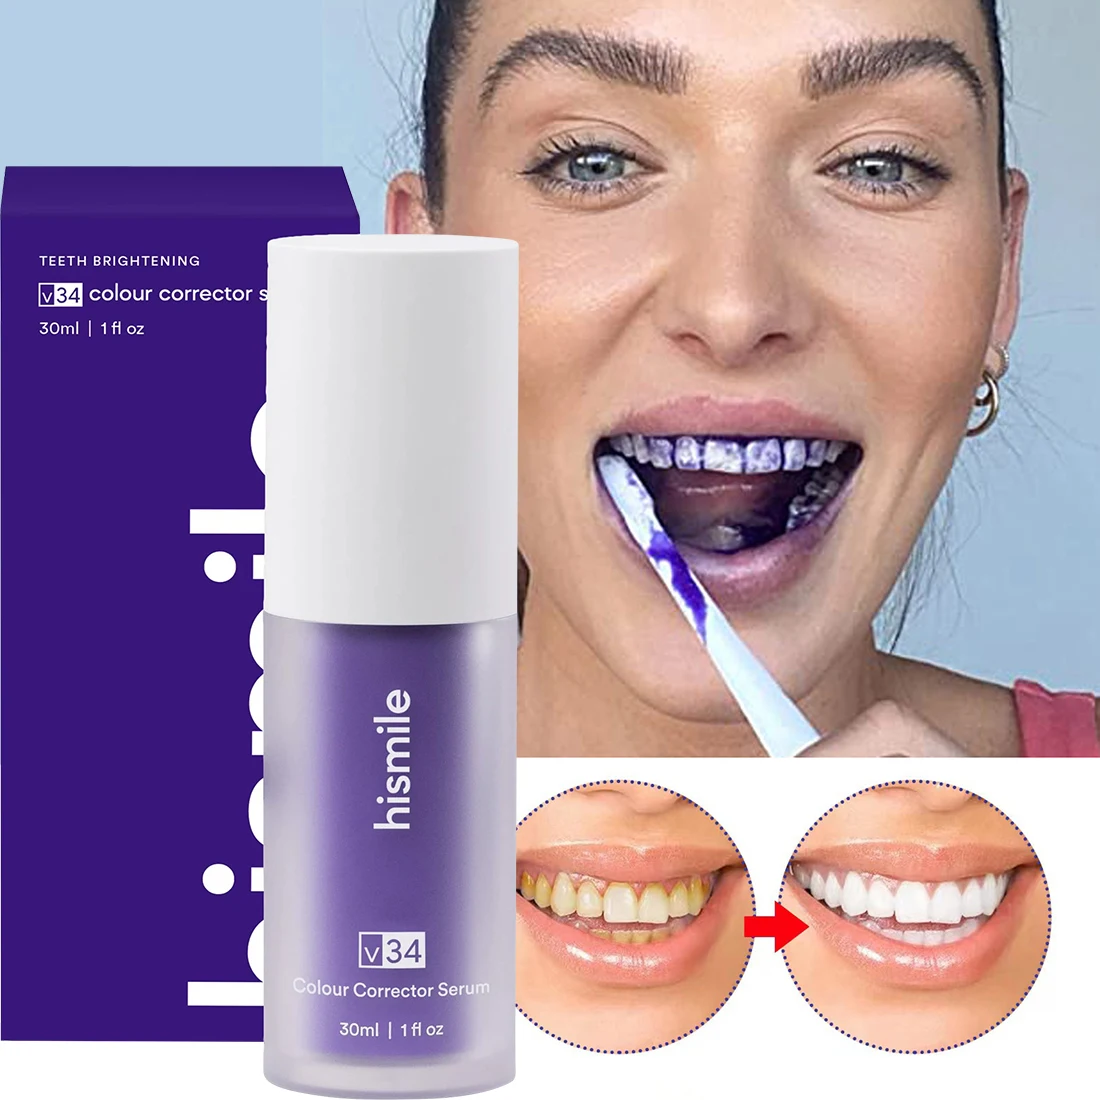 

V34 Mousse Toothpaste Teeth Whitening Clean Whiten Remove Yellow Plaque Stains Removing Tooth Stains Oral Cleaning Hygiene